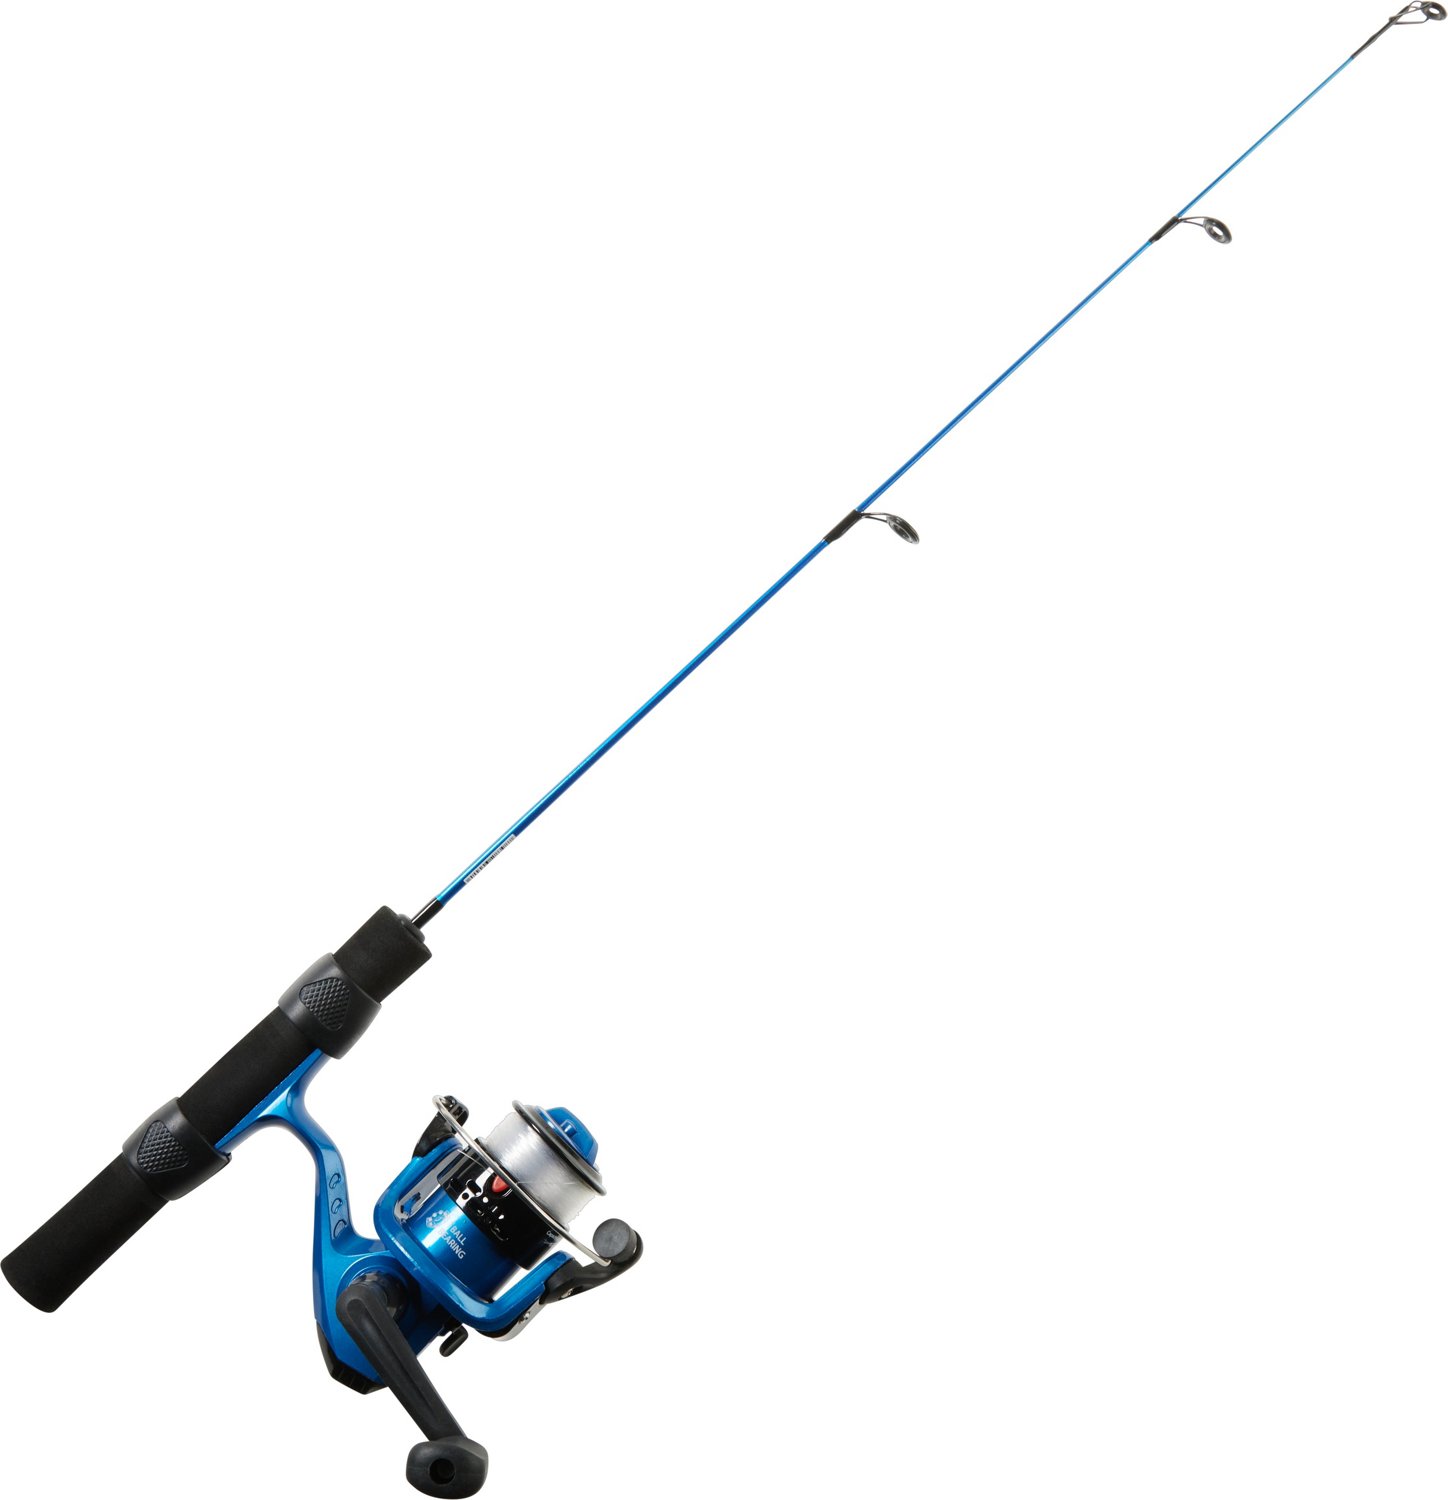 PLUSINNO Kids Fishing Pole, Rainbow Series Portable Telescopic Fishing Rod  and Reel Combo Kit - with Spincast Fishing Reel Tackle Box for Boys, Girls,  Youth : : Sports, Fitness & Outdoors